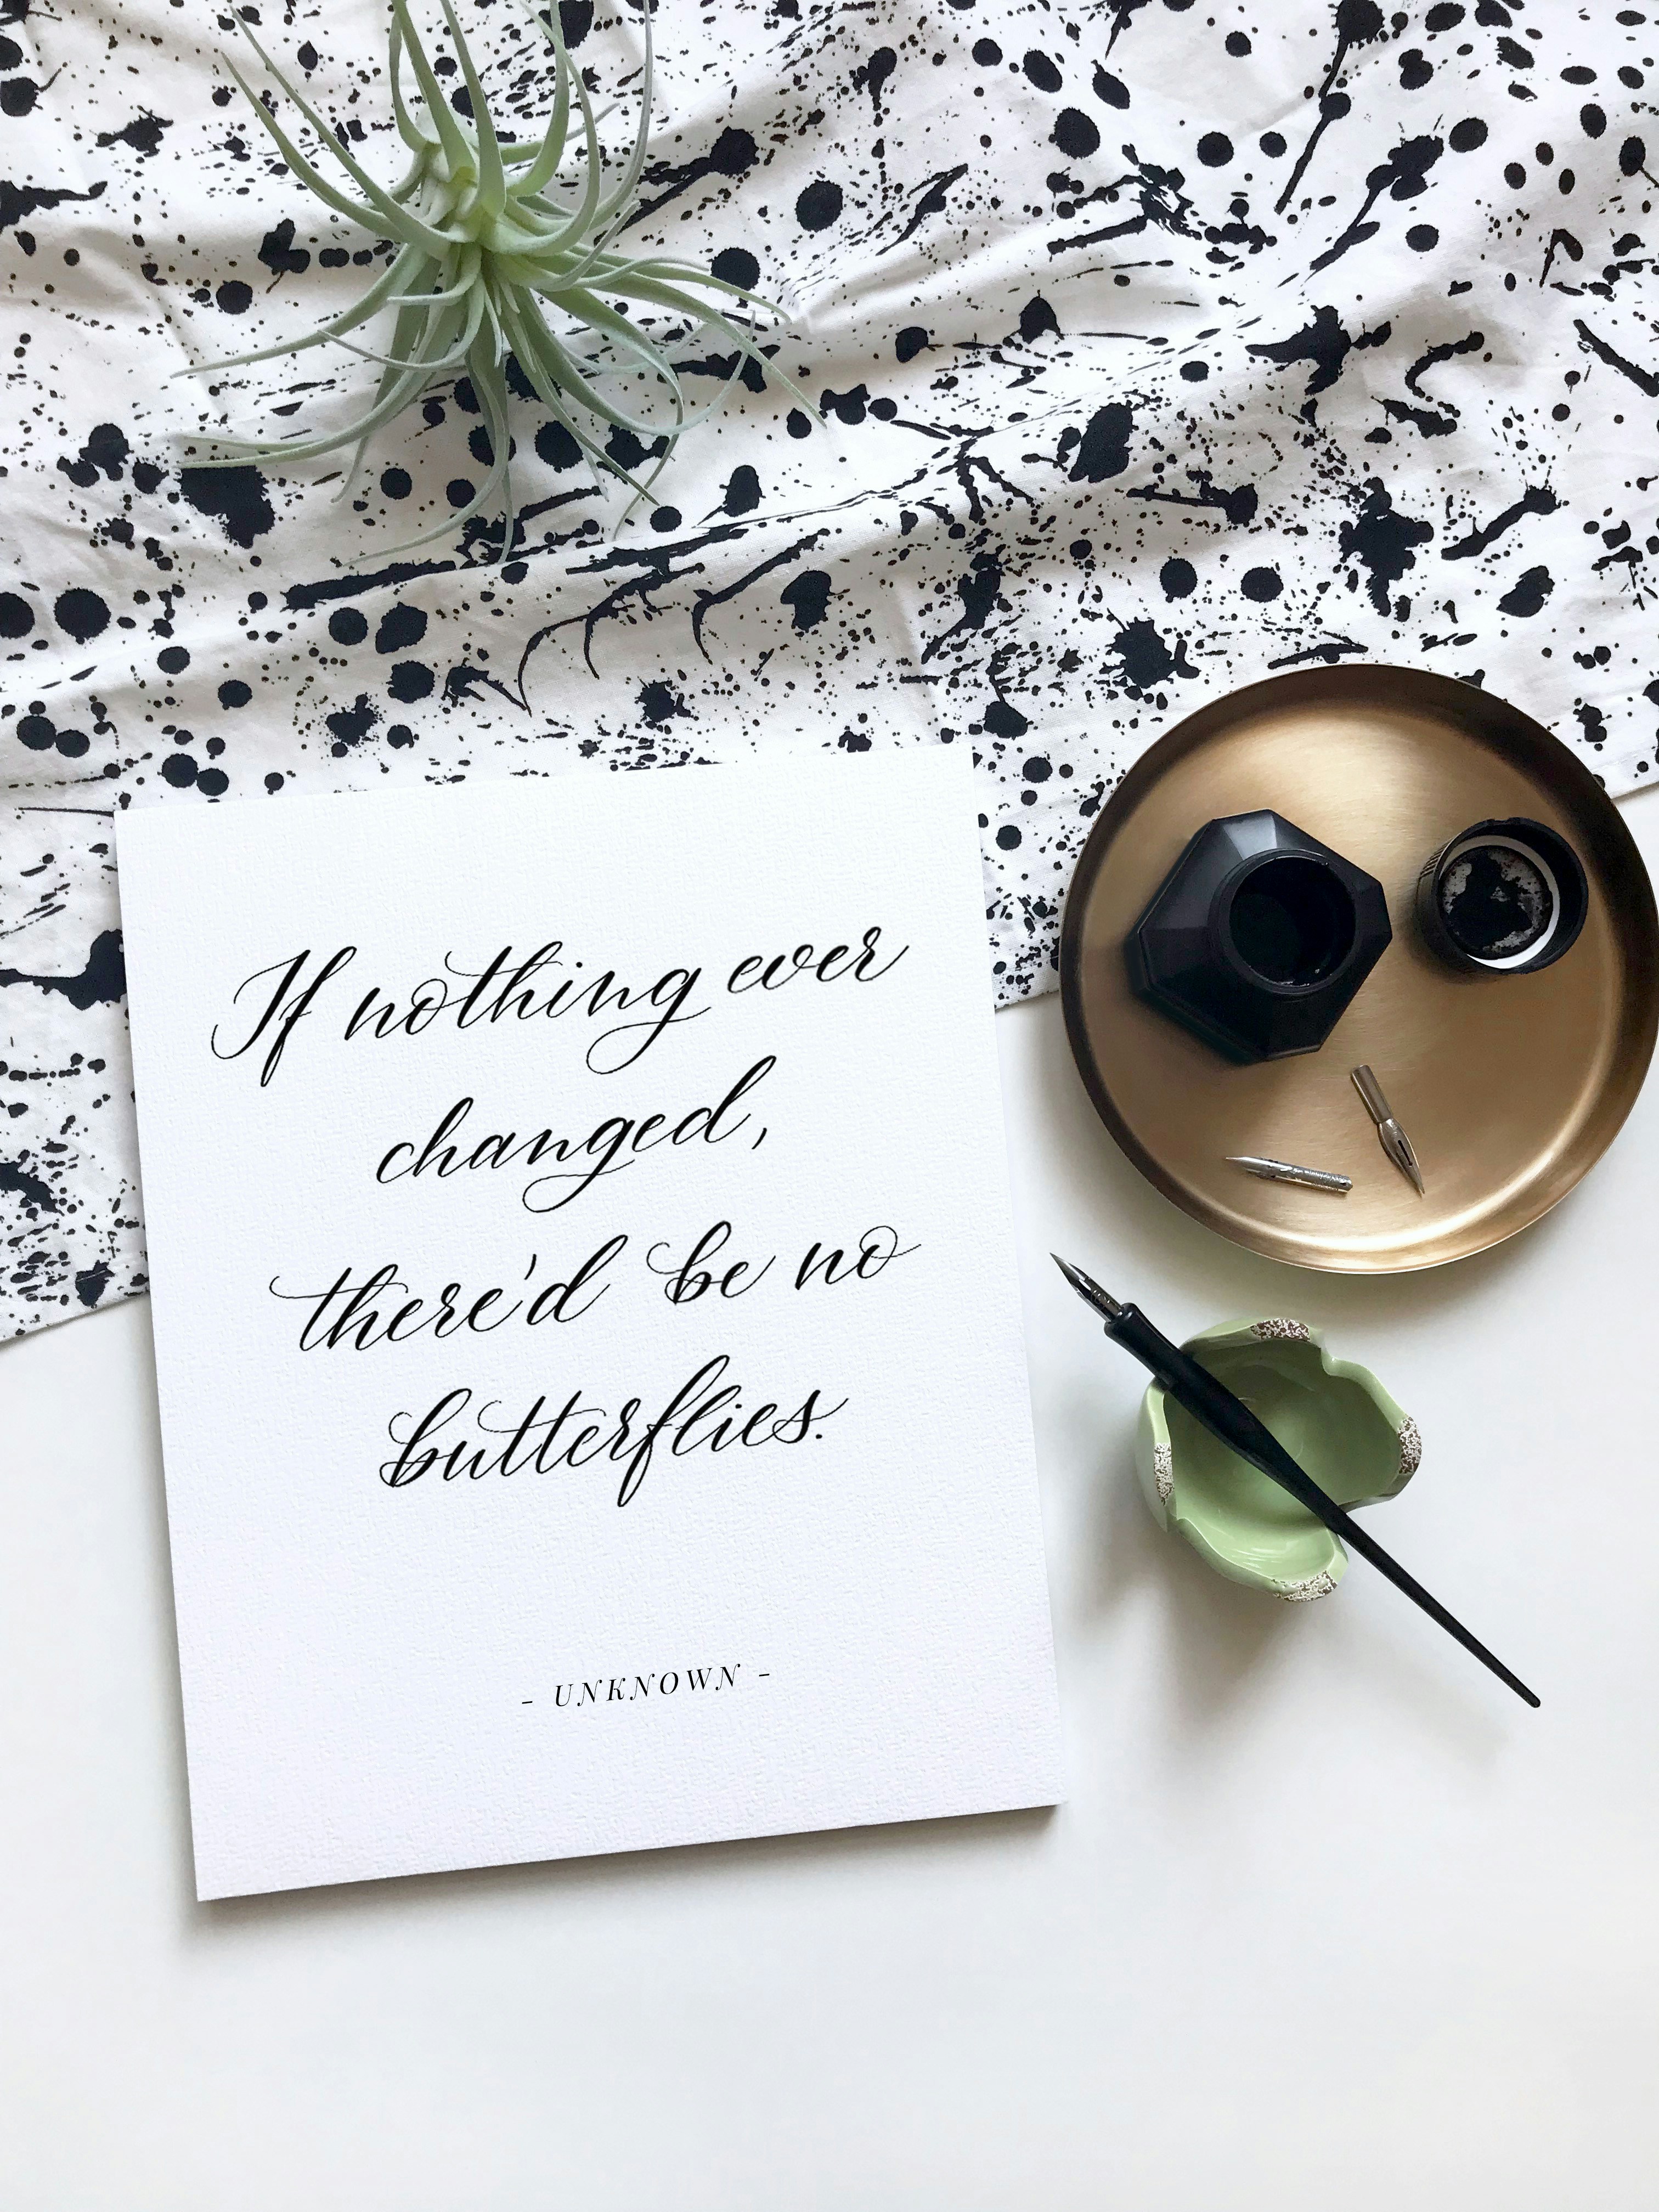 Flatlay arrangement with writing pad